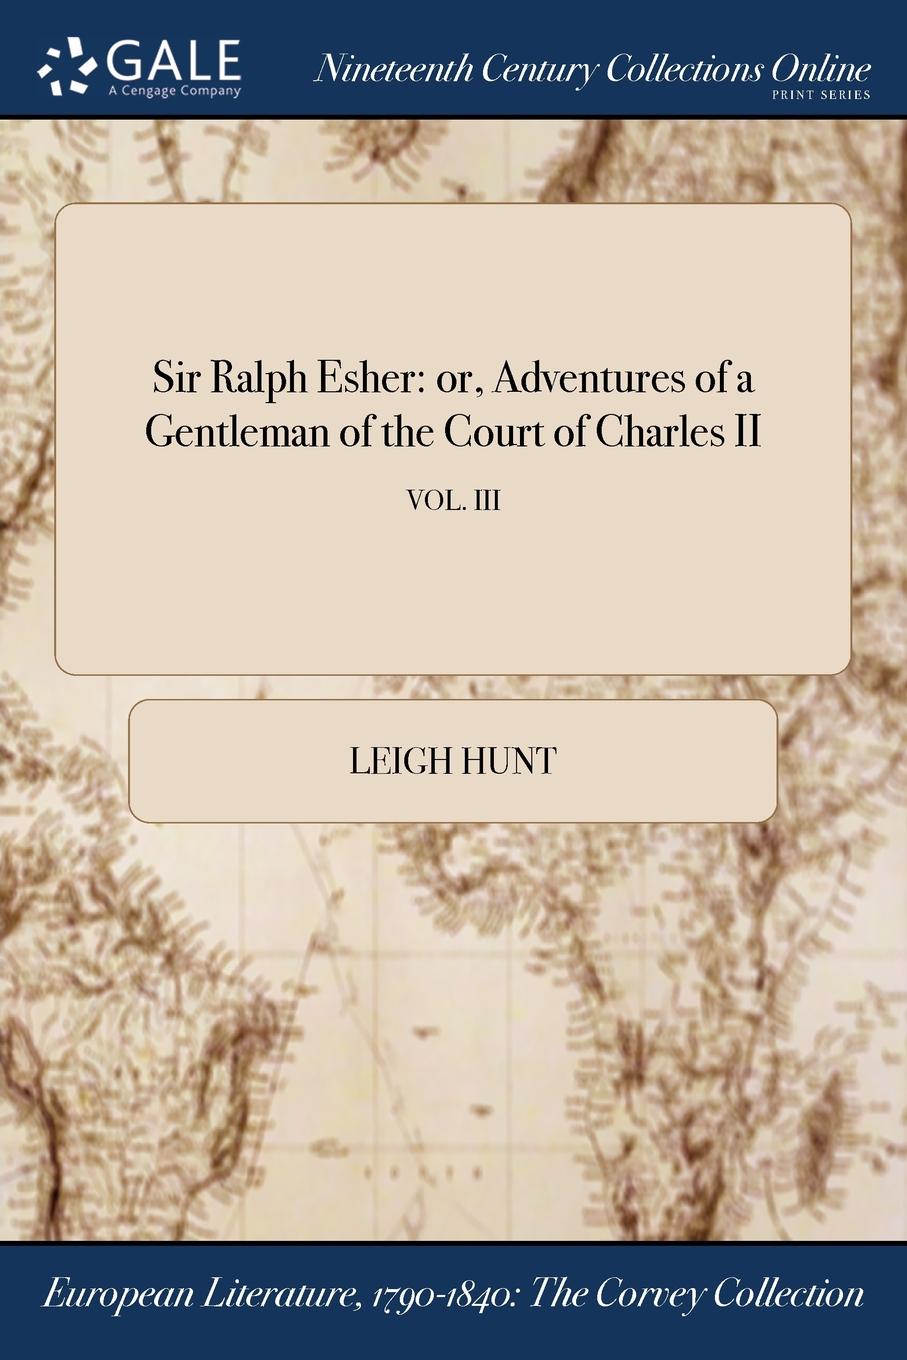 Leigh Hunt Sir Ralph Esher. or, Adventures of a Gentleman of the Court of Charles II; VOL. III